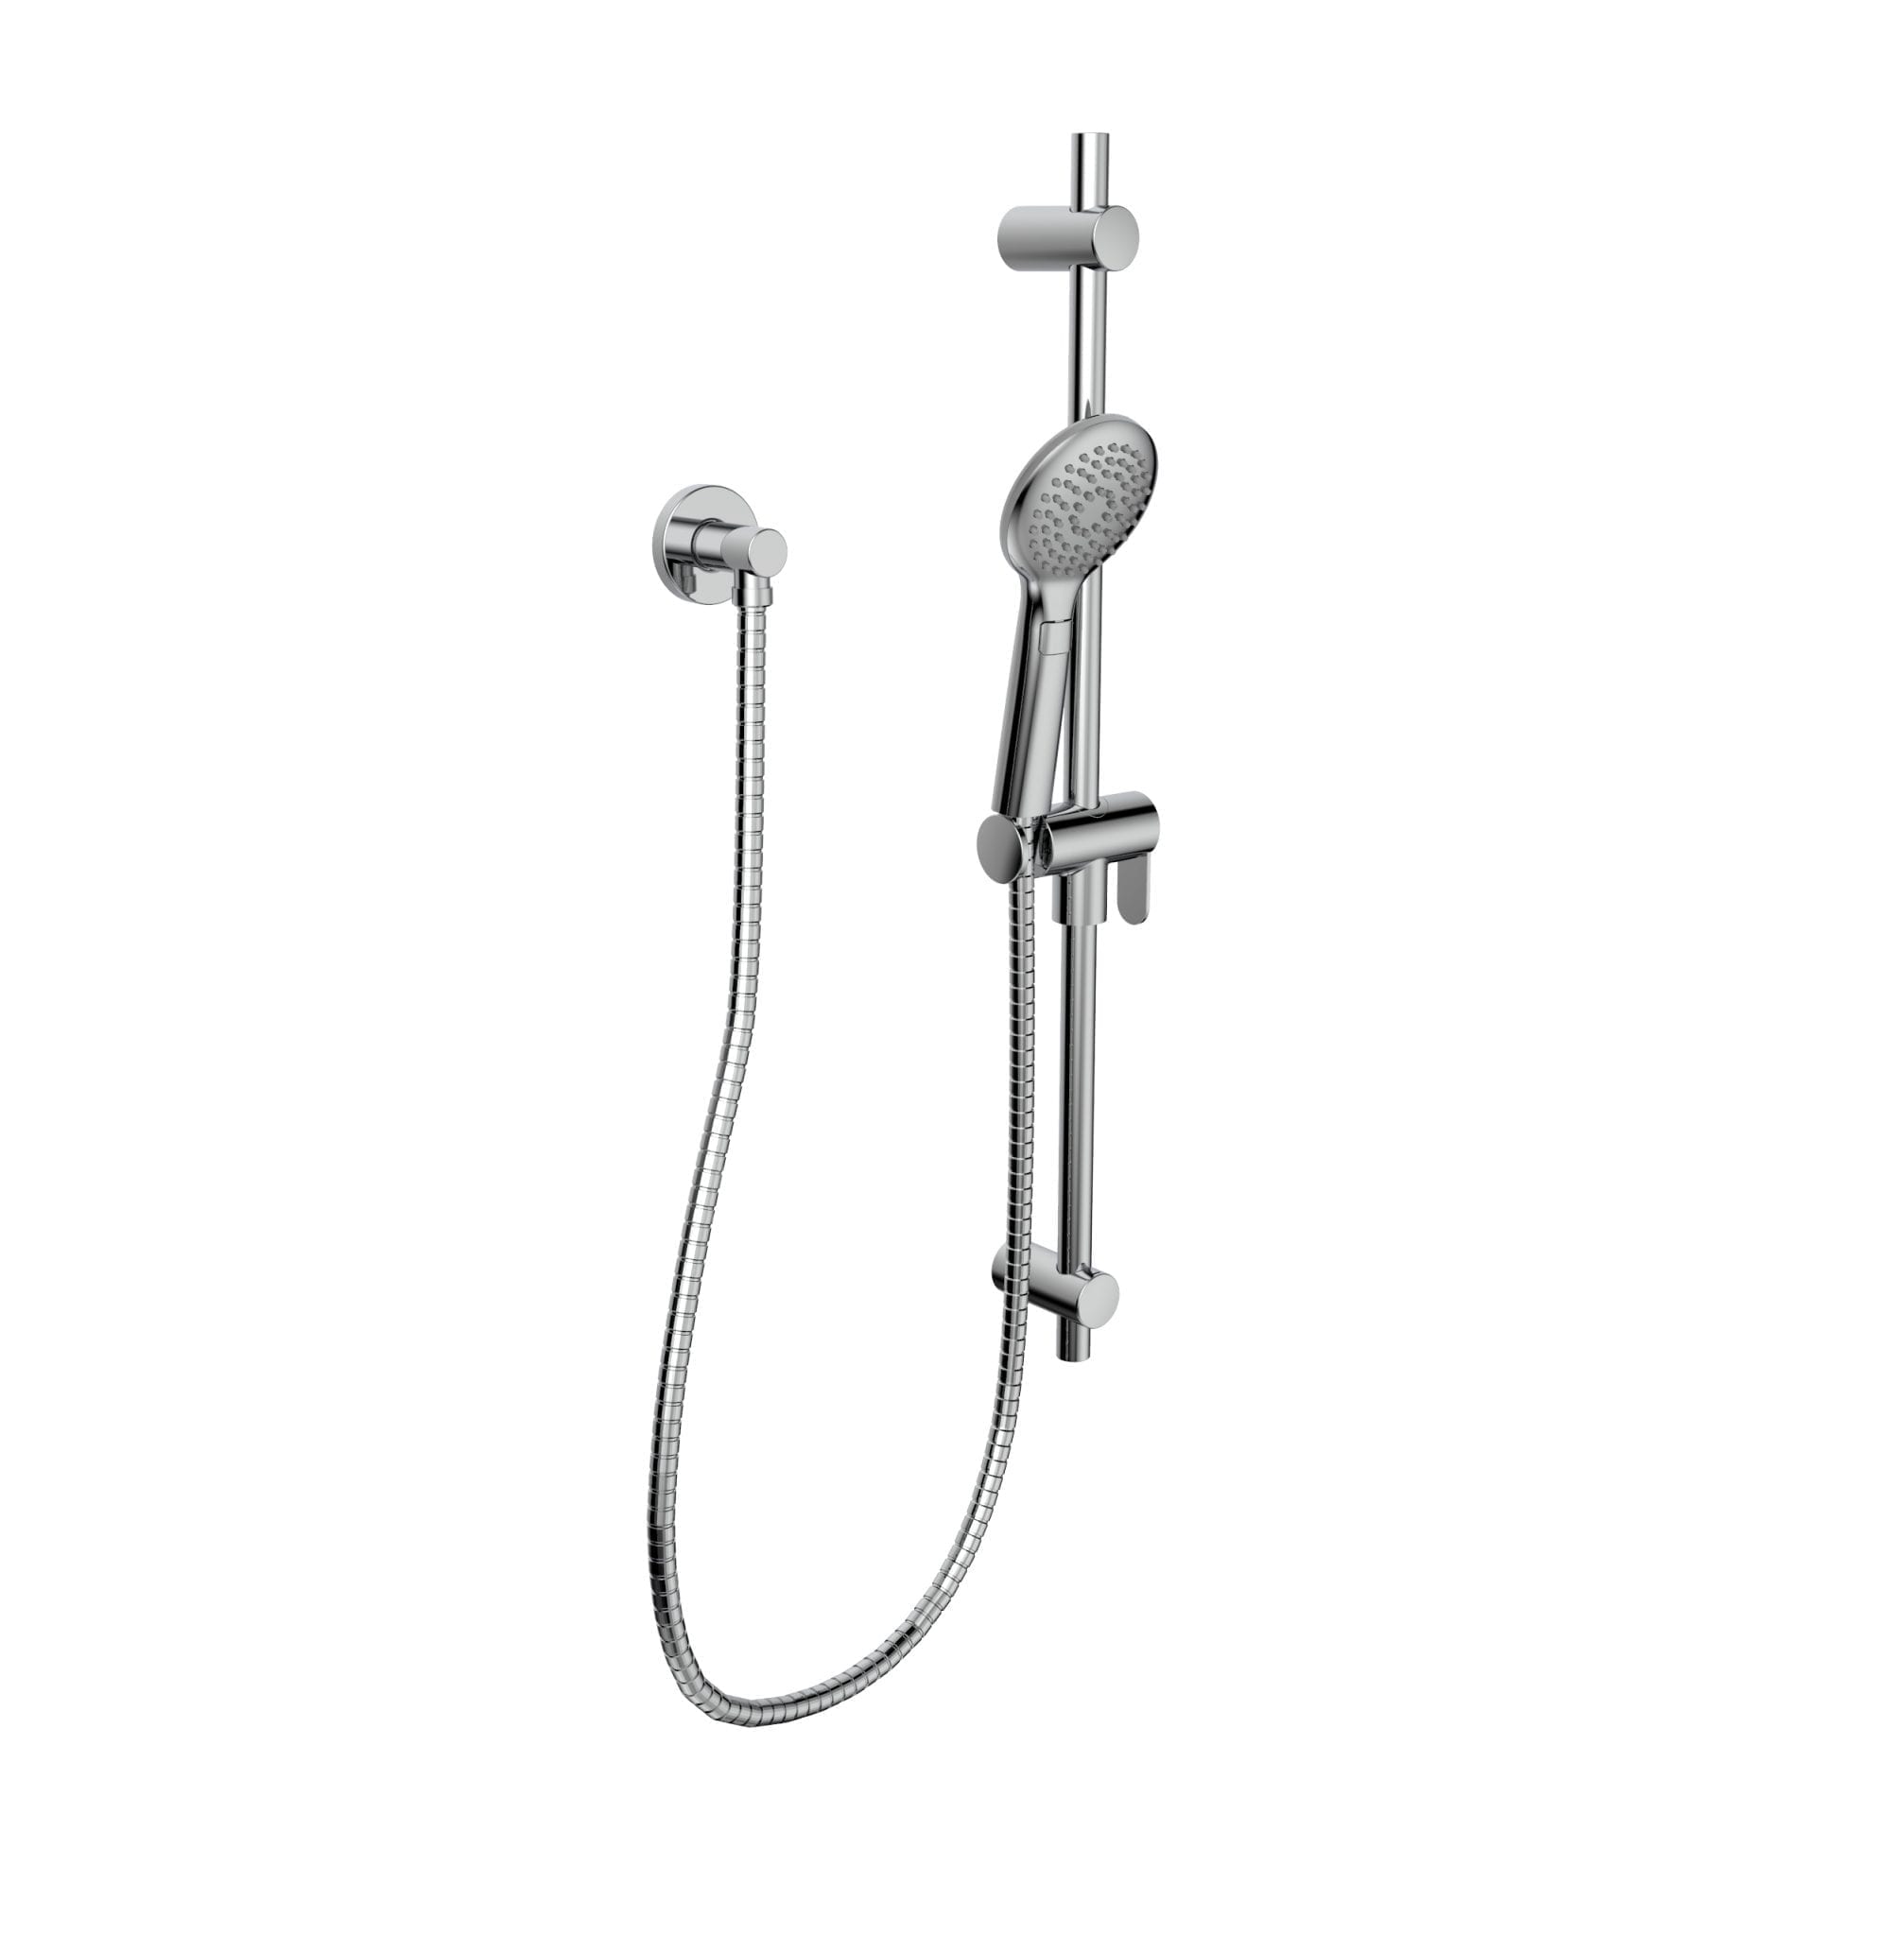 Bélanger B90-731- Sliding Bar Kit (Round) With Dual Function Hand Shower, Water Supply Elbow And Flexible Hose